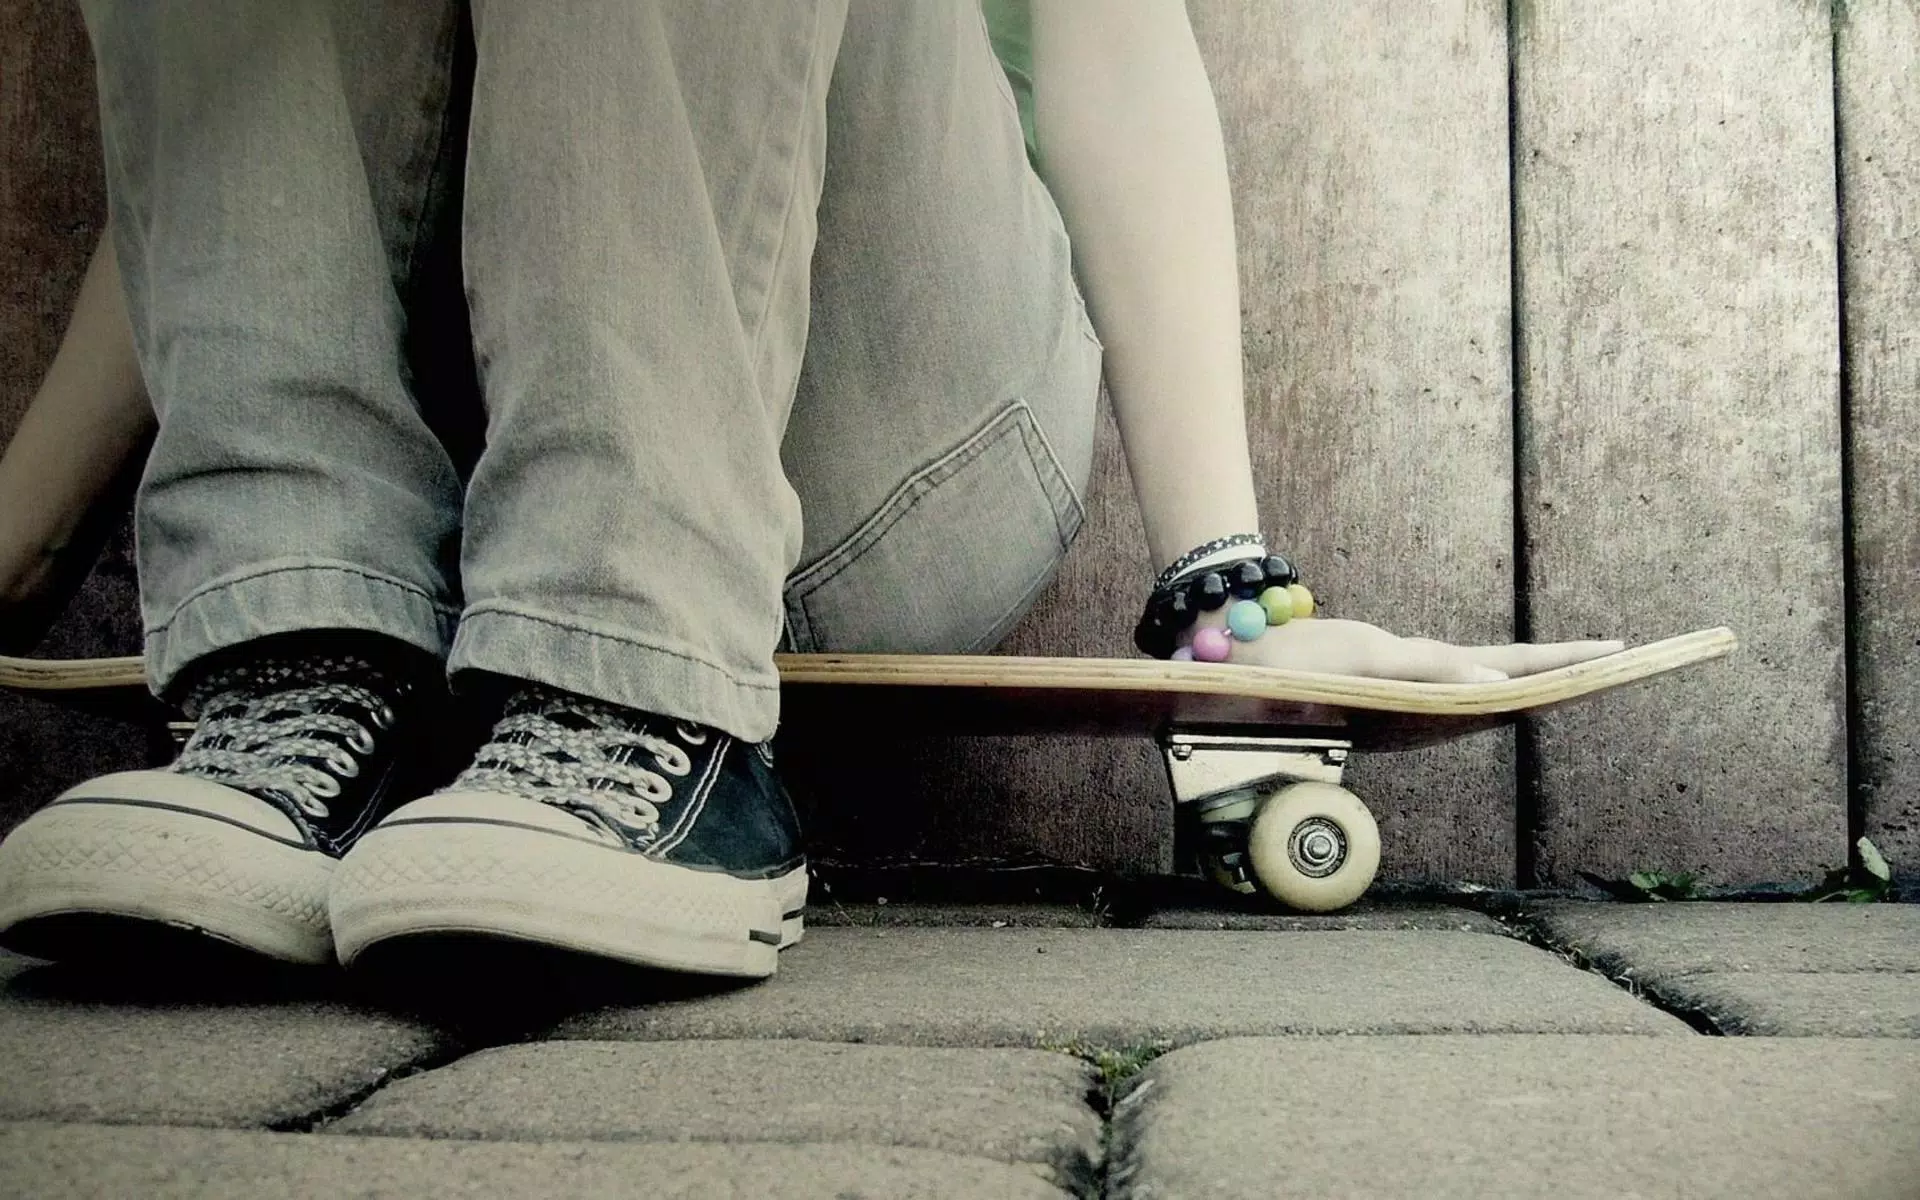 Skateboard Wallpaper Apk For Android Download